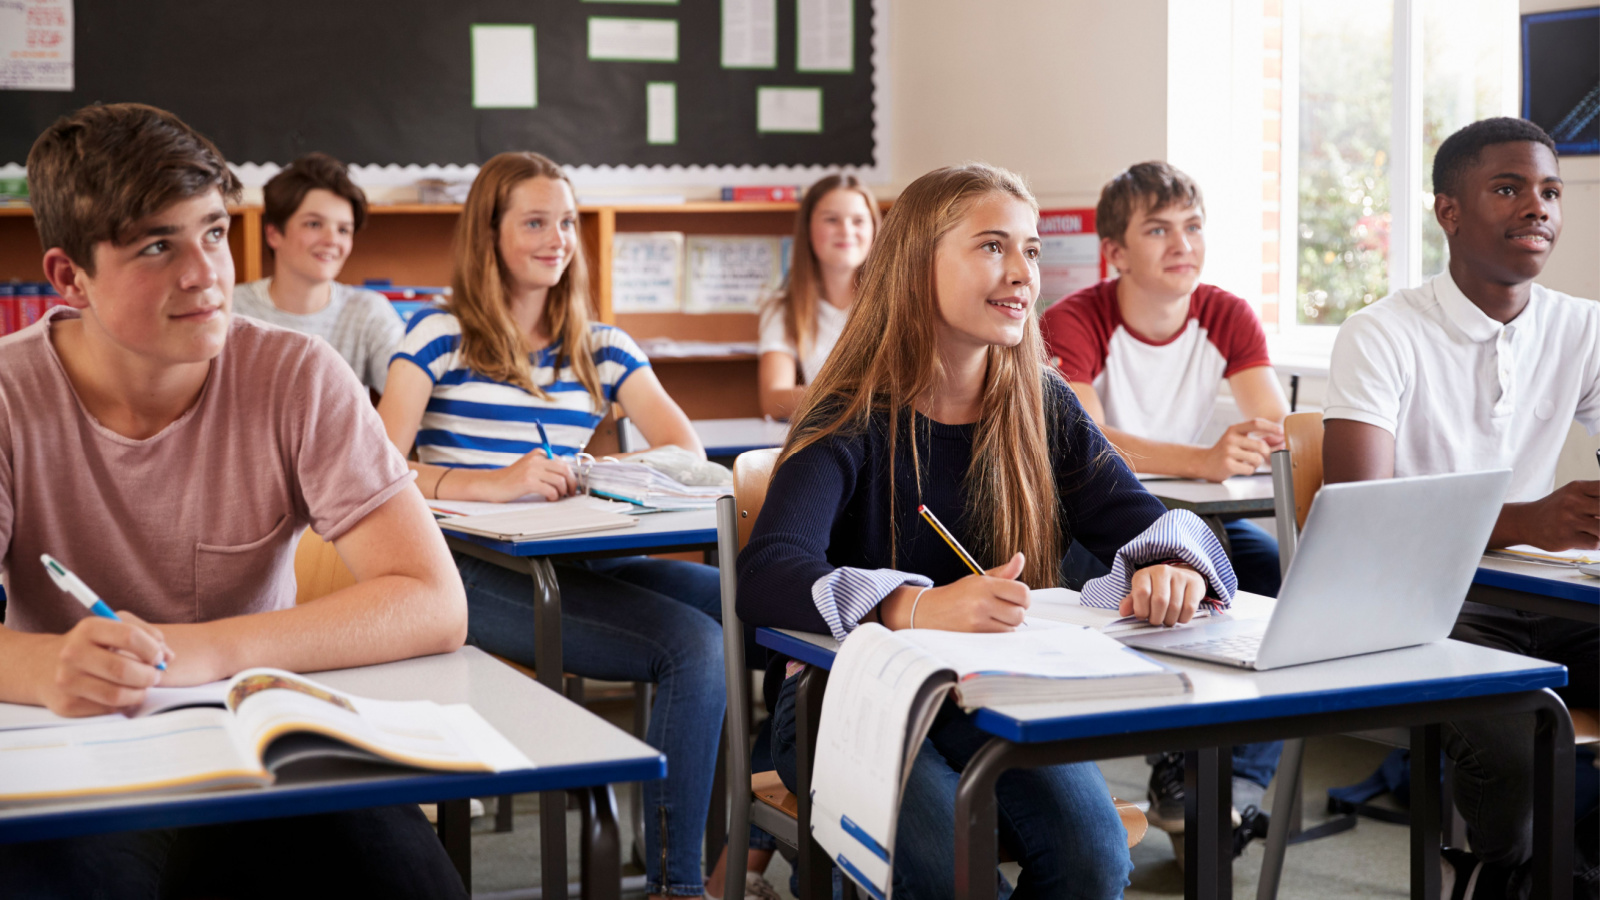 image credit: Monkey Business Images/Shutterstock <p><span>Opposition to the bill came from Juliet Meadows-Keefe of Florida Moms for Accurate Education, who wanted to be sure that if the bill passes, the curriculum will include instruction on the divisiveness of the McCarthy era in the United States, where people were accused by their neighbors of being communists and fear and suspicious reigned in the collective conscience. There is no reason to believe the bill would not require instruction on that era of American history, as many Americans today lived through that period.</span></p>